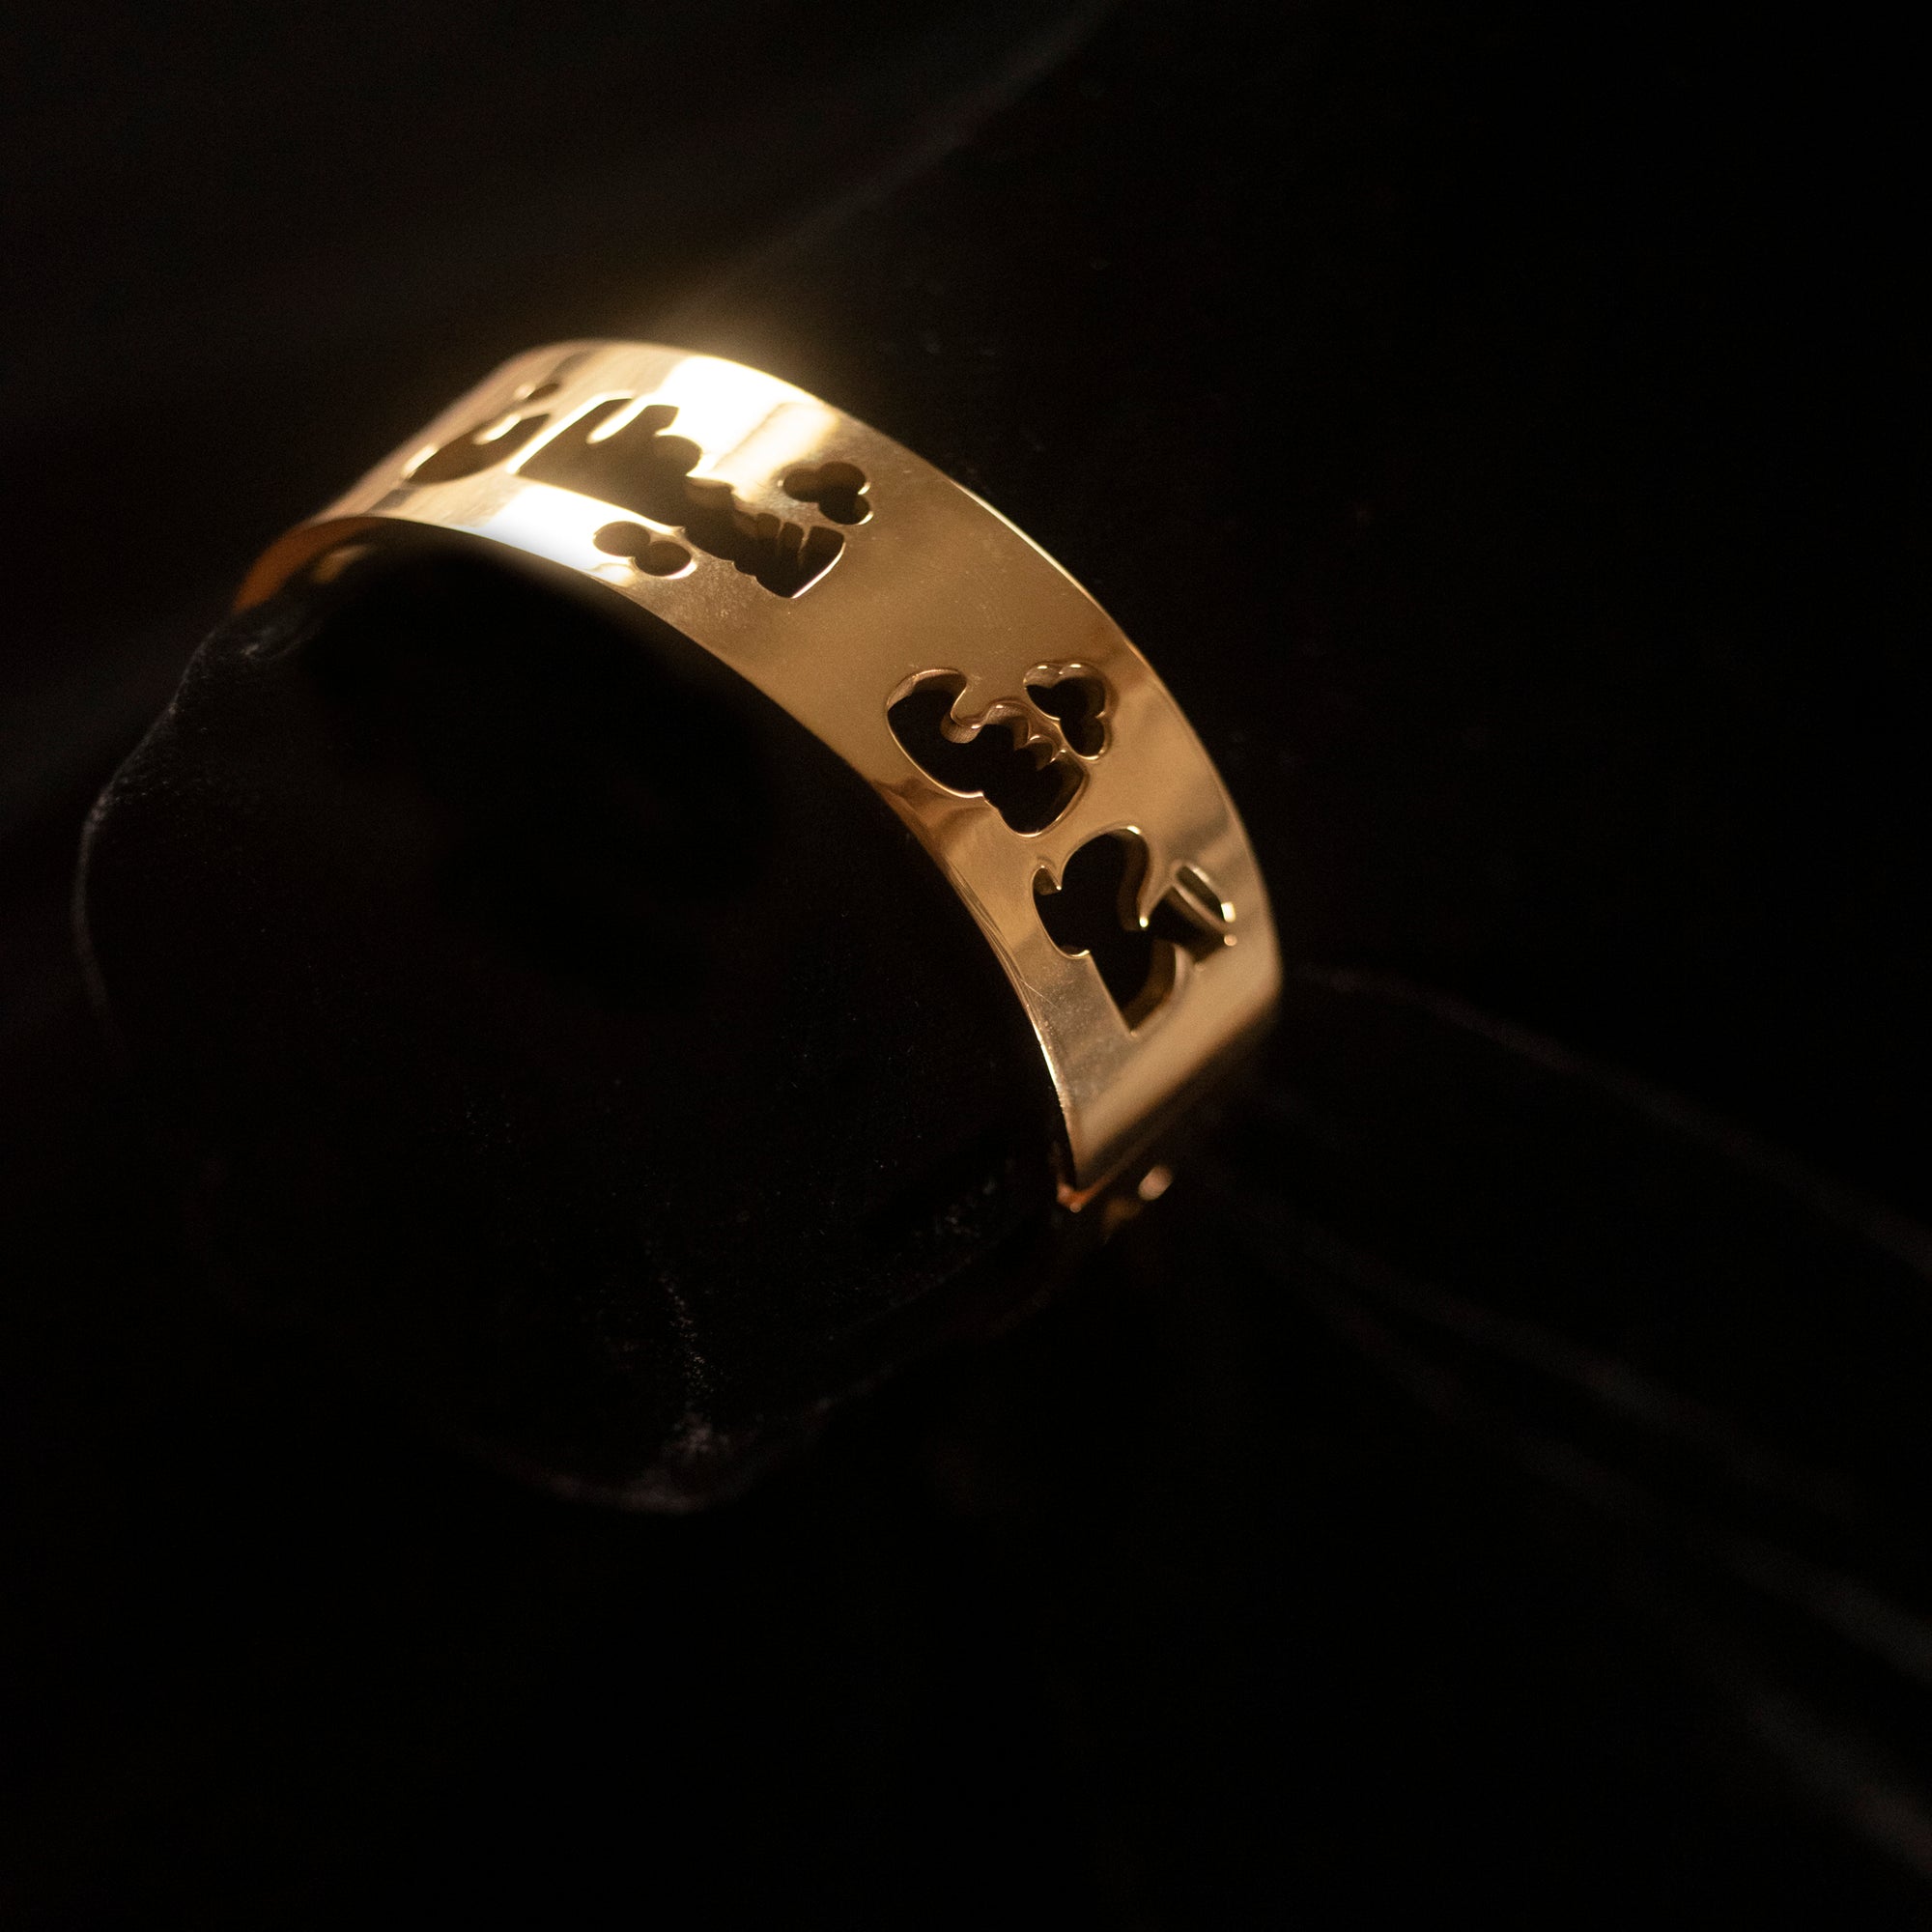 A gold bangle that says may the devils ears be deaf in Dari.